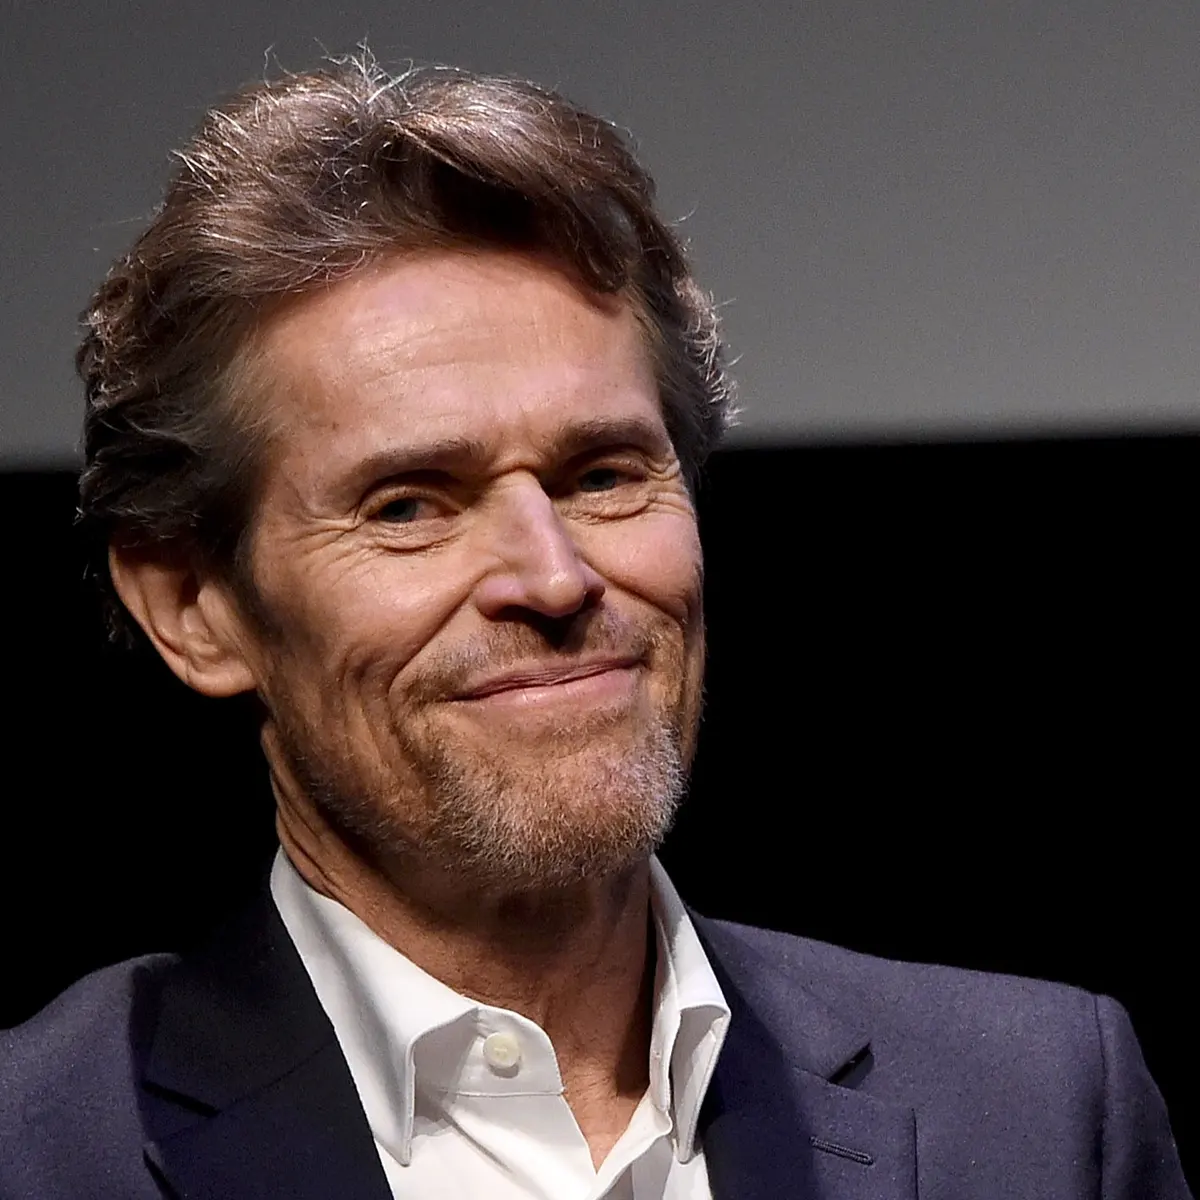 Besides the question "How tall is Willem Dafoe?", we also know that Dafoe played the villain Norman Osborn / Green Goblin in the superhero movie Spider-Man (2002)